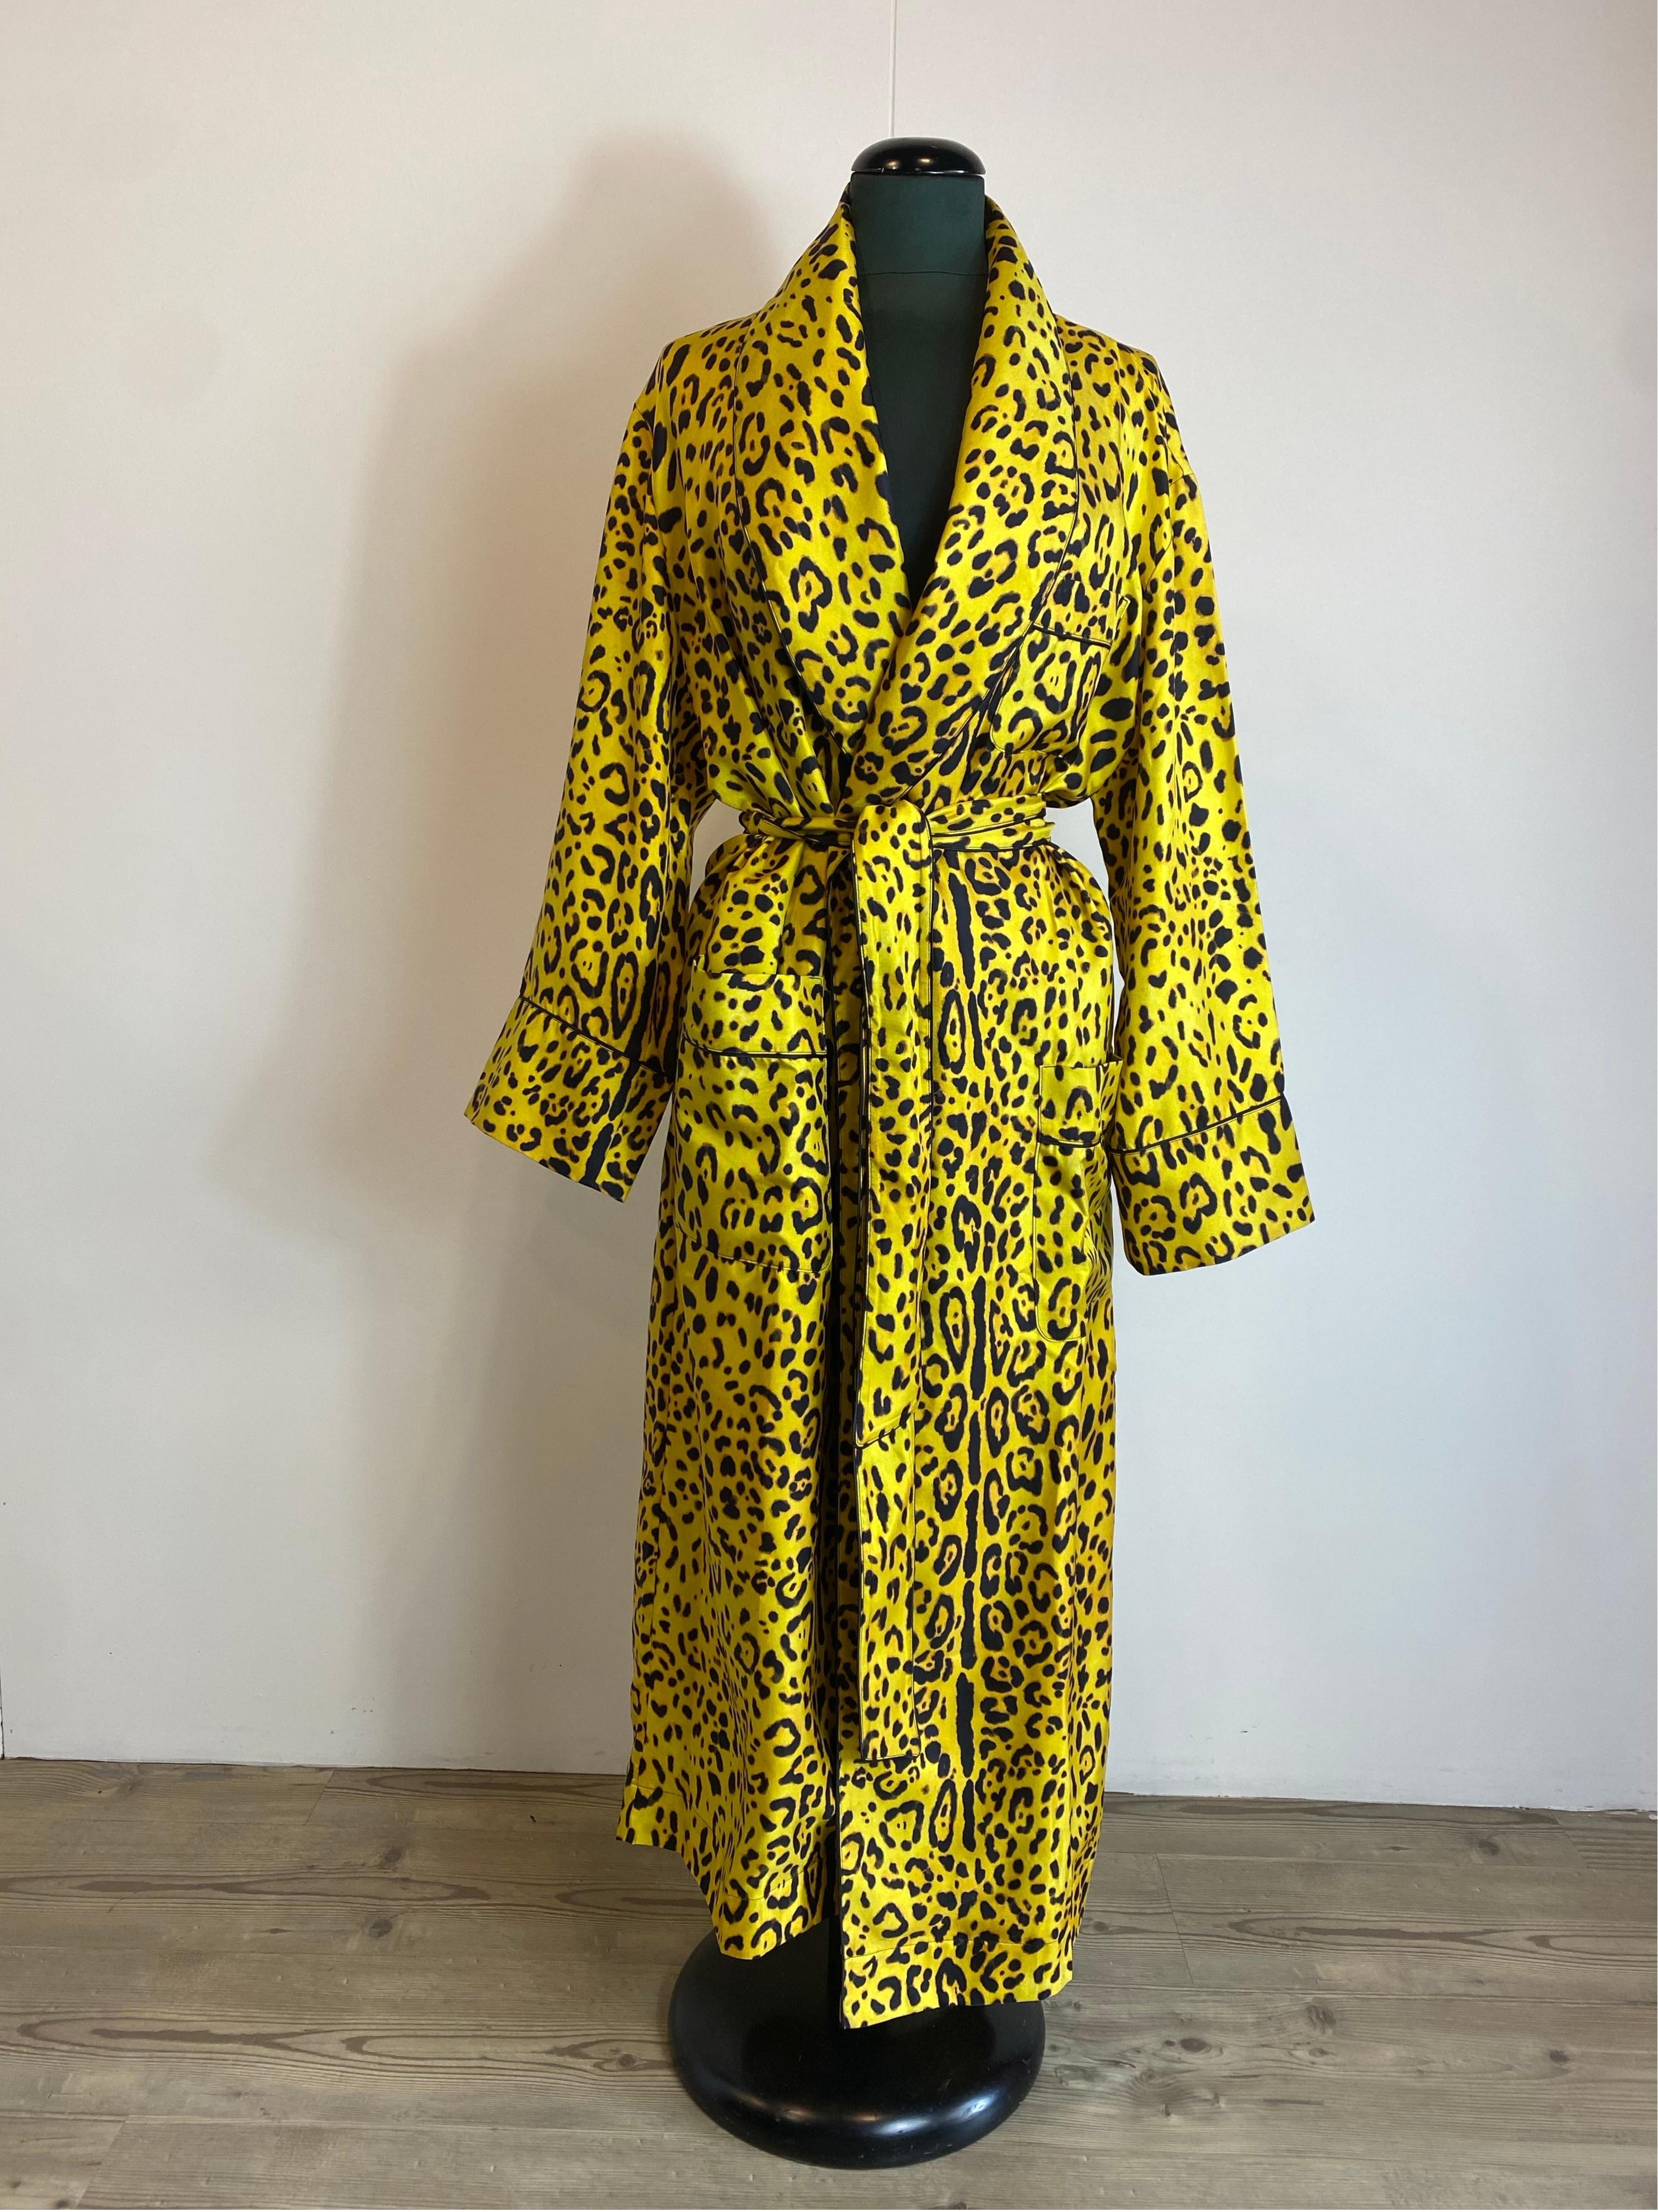 Dolce and Gabbana Lingerie Night Gown
In 100% silk, leopard pattern.
Italian size 40 but soft fit.
Shoulders 46 cm
Length 132 cm
Sleeve 59 cm
Features matching eye mask.
New, still with original label.
Even though it is new, it has some loose